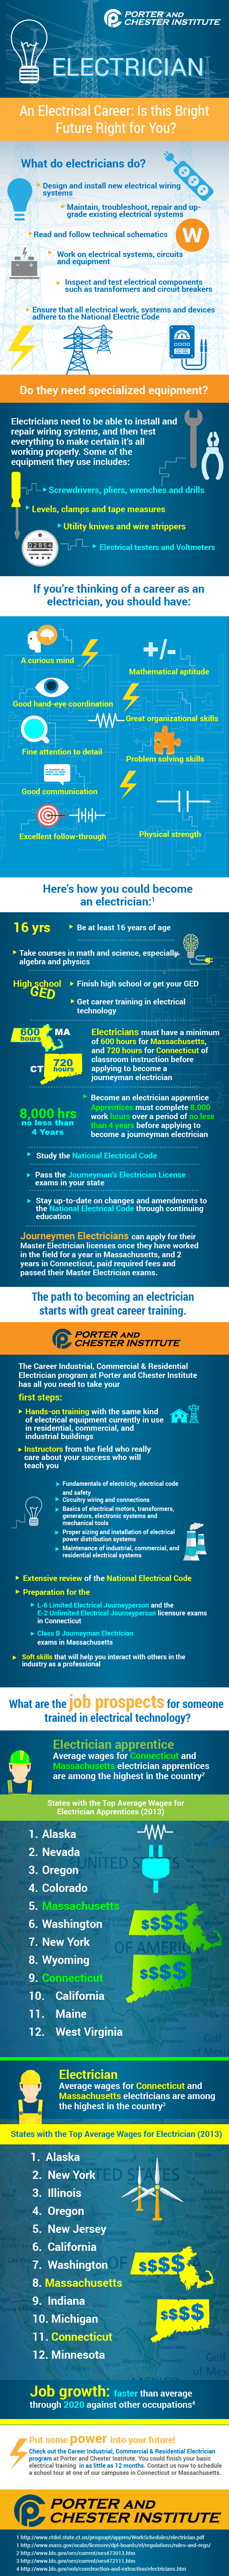 Is an electrical career right for you? - Infographic